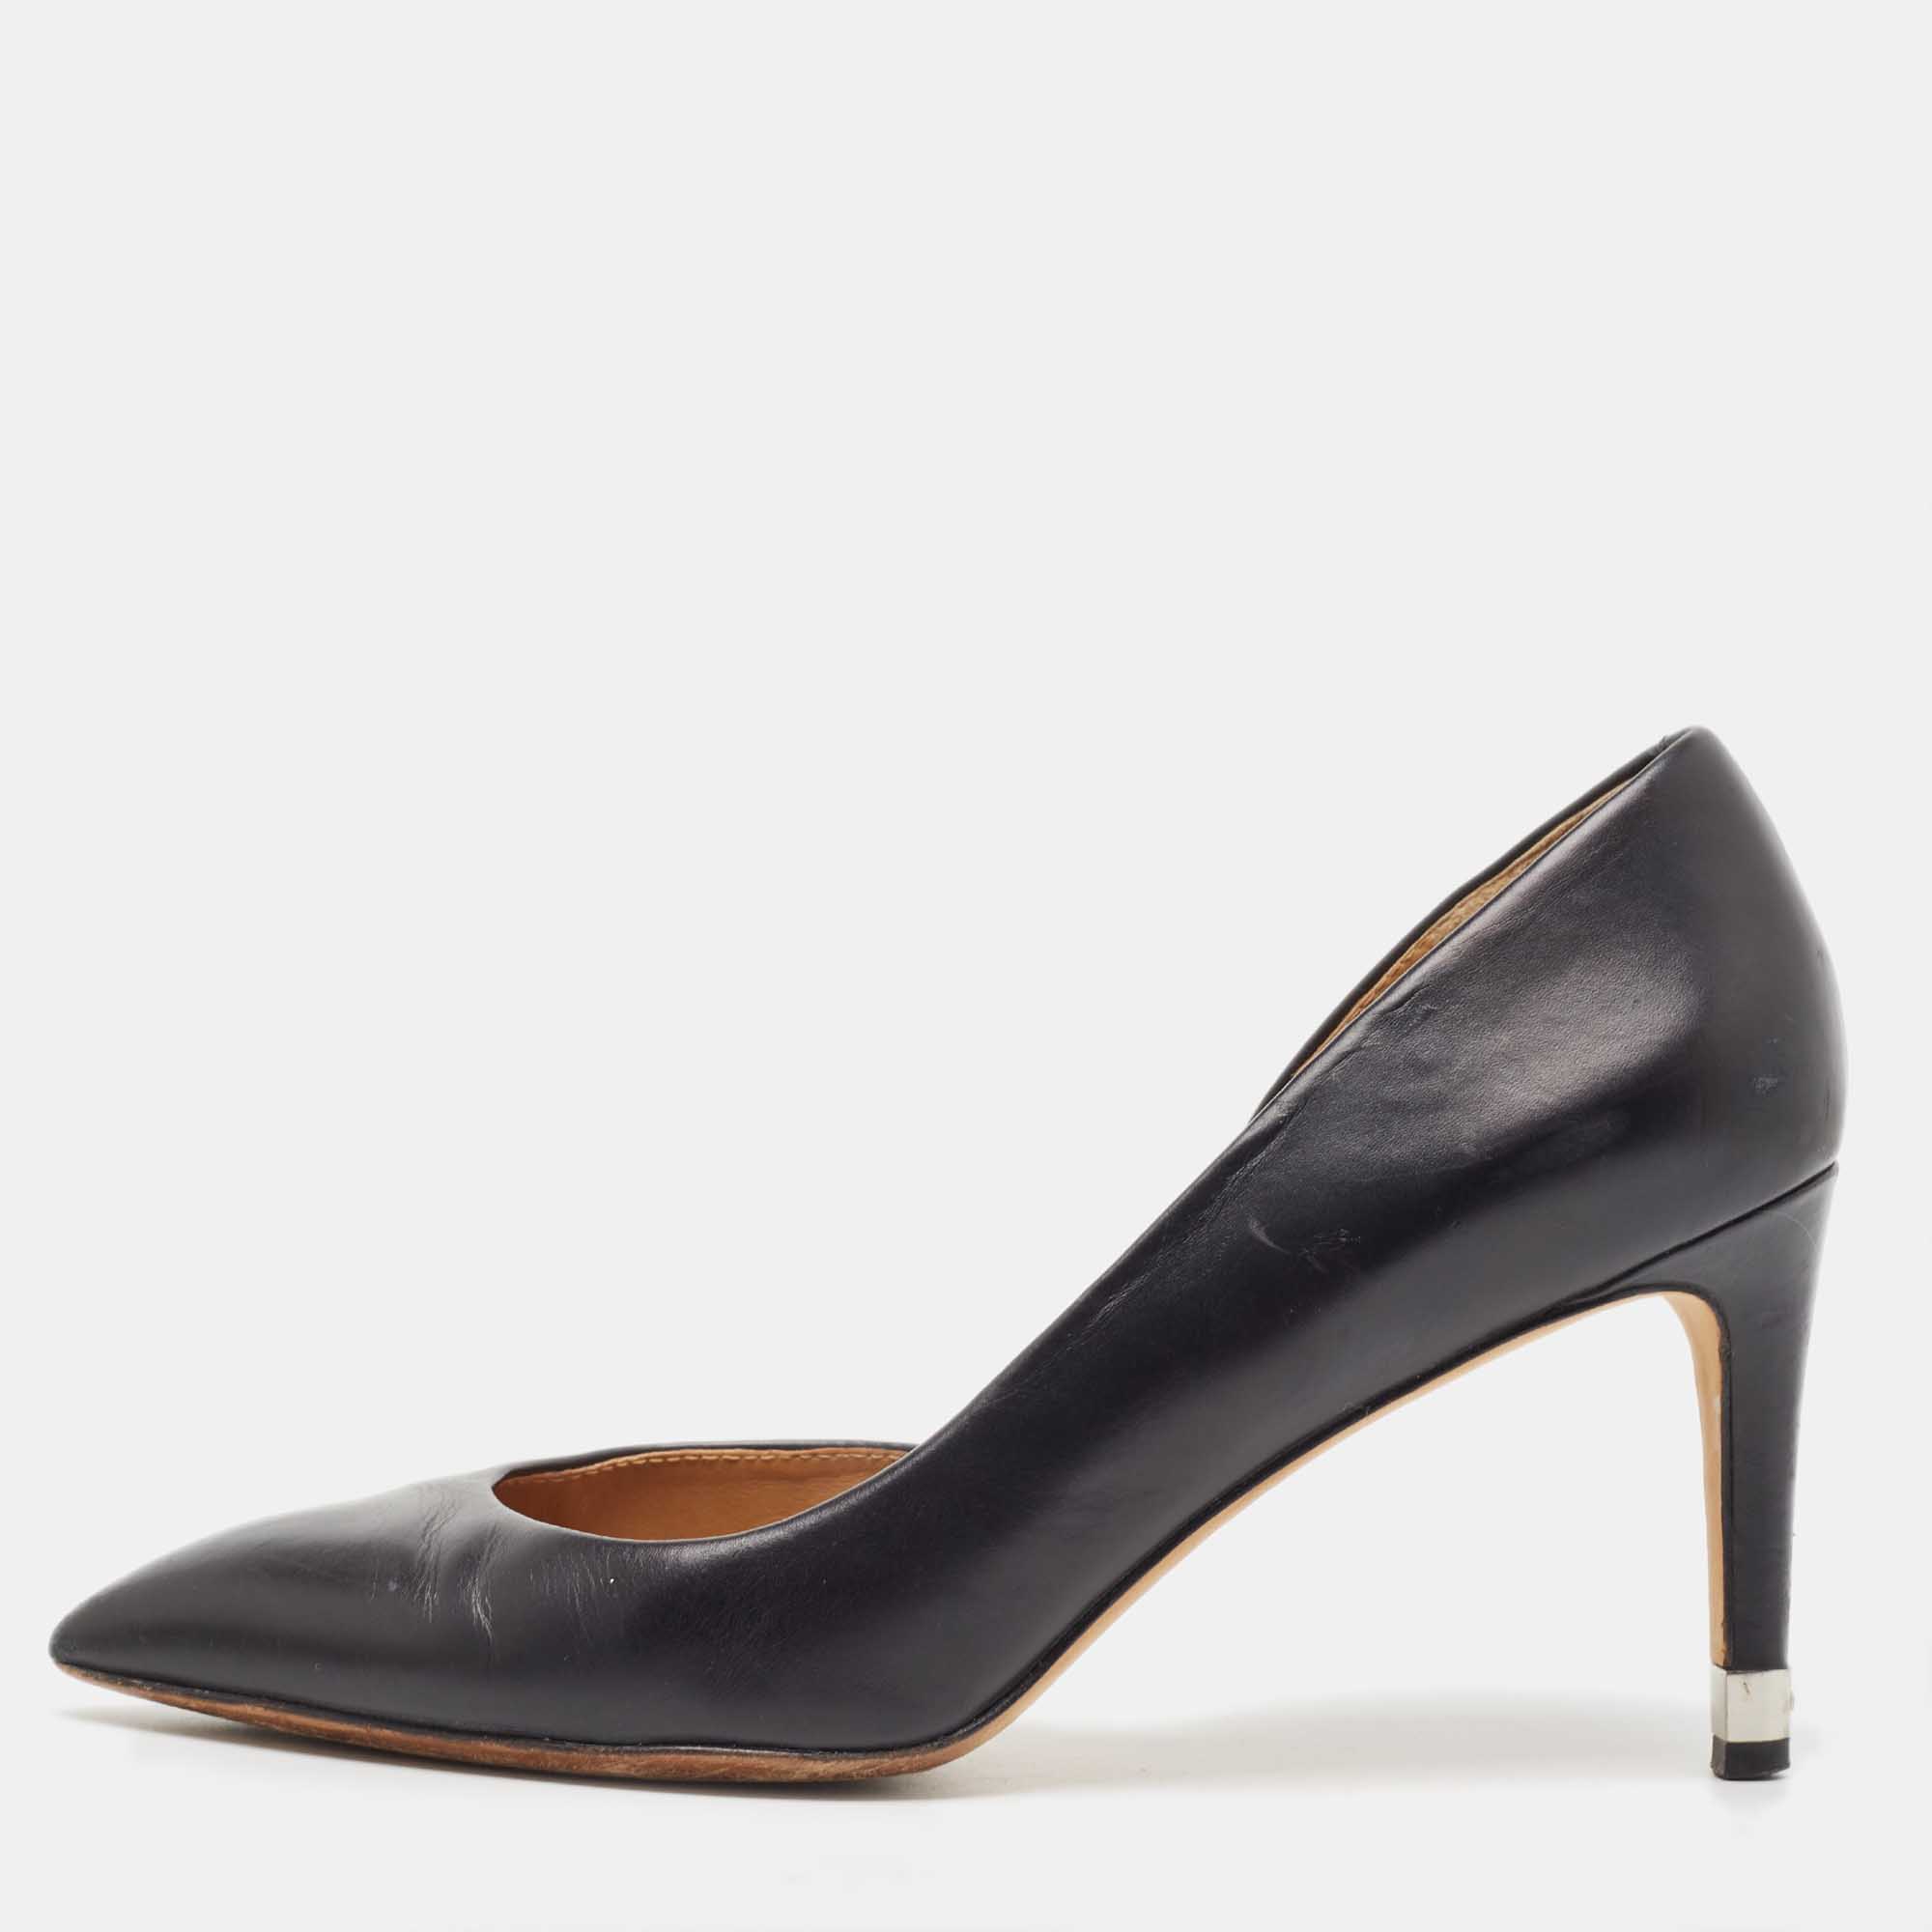 Marc By Marc Jacobs Black Leather D'orsay Pumps Size 38.5